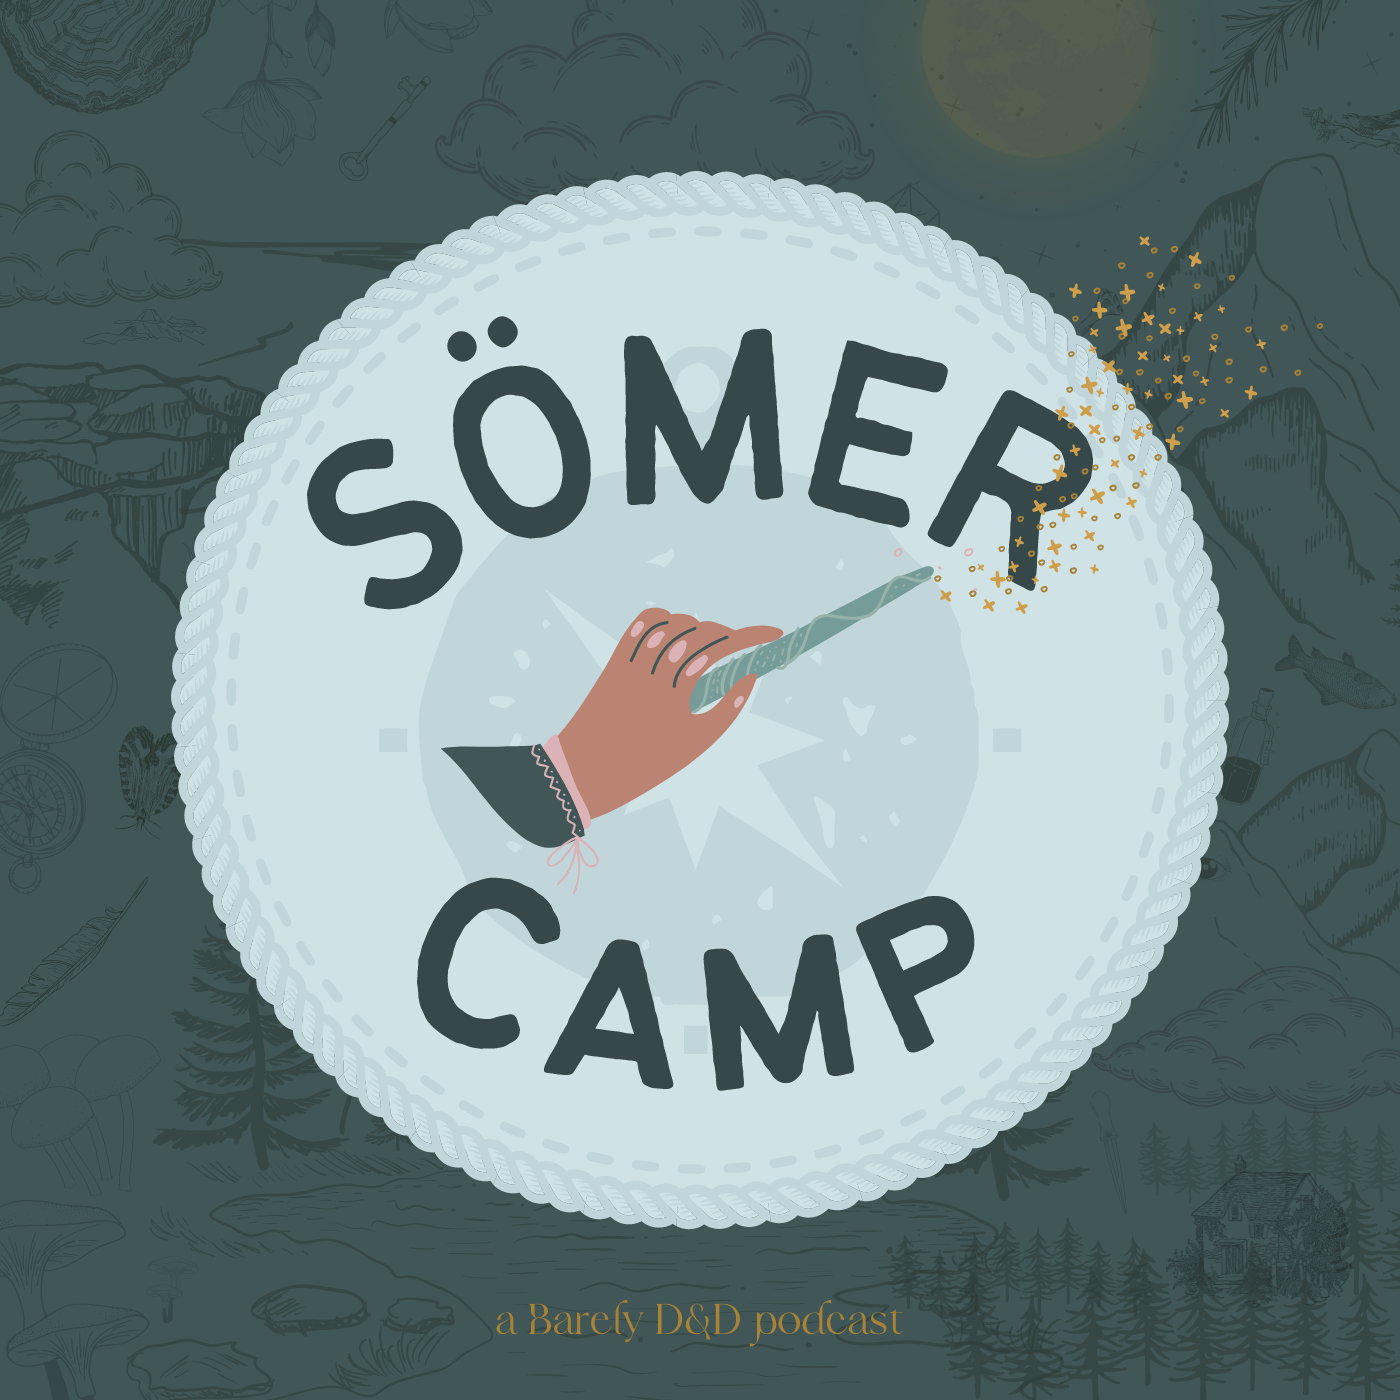 Sömer Camp 03: Babes in the Wood